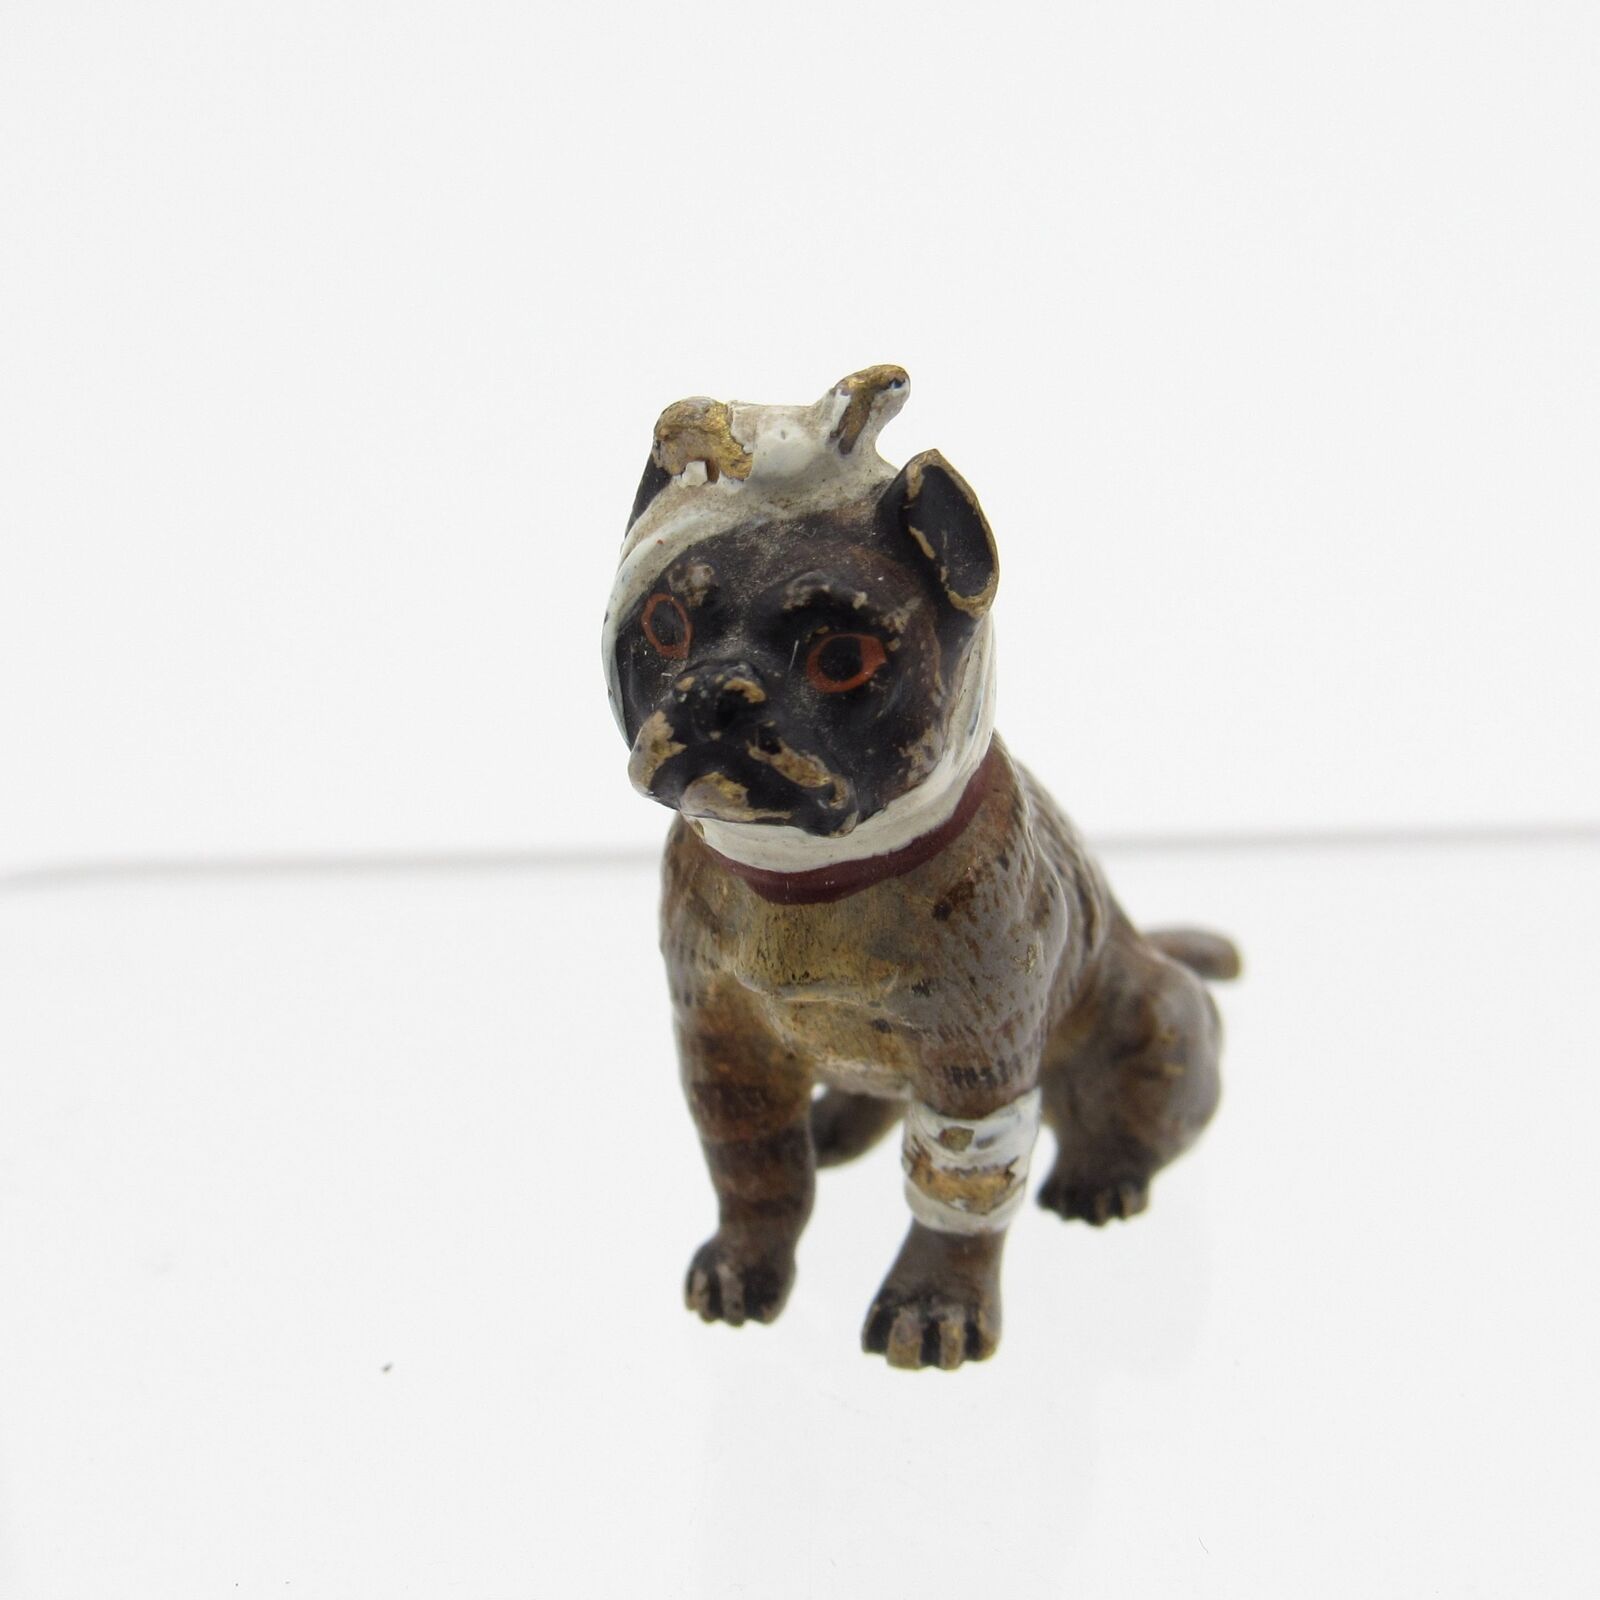 Antique Vienna Bronze Cold Painted Pug Dog with Bandage on Leg and Head